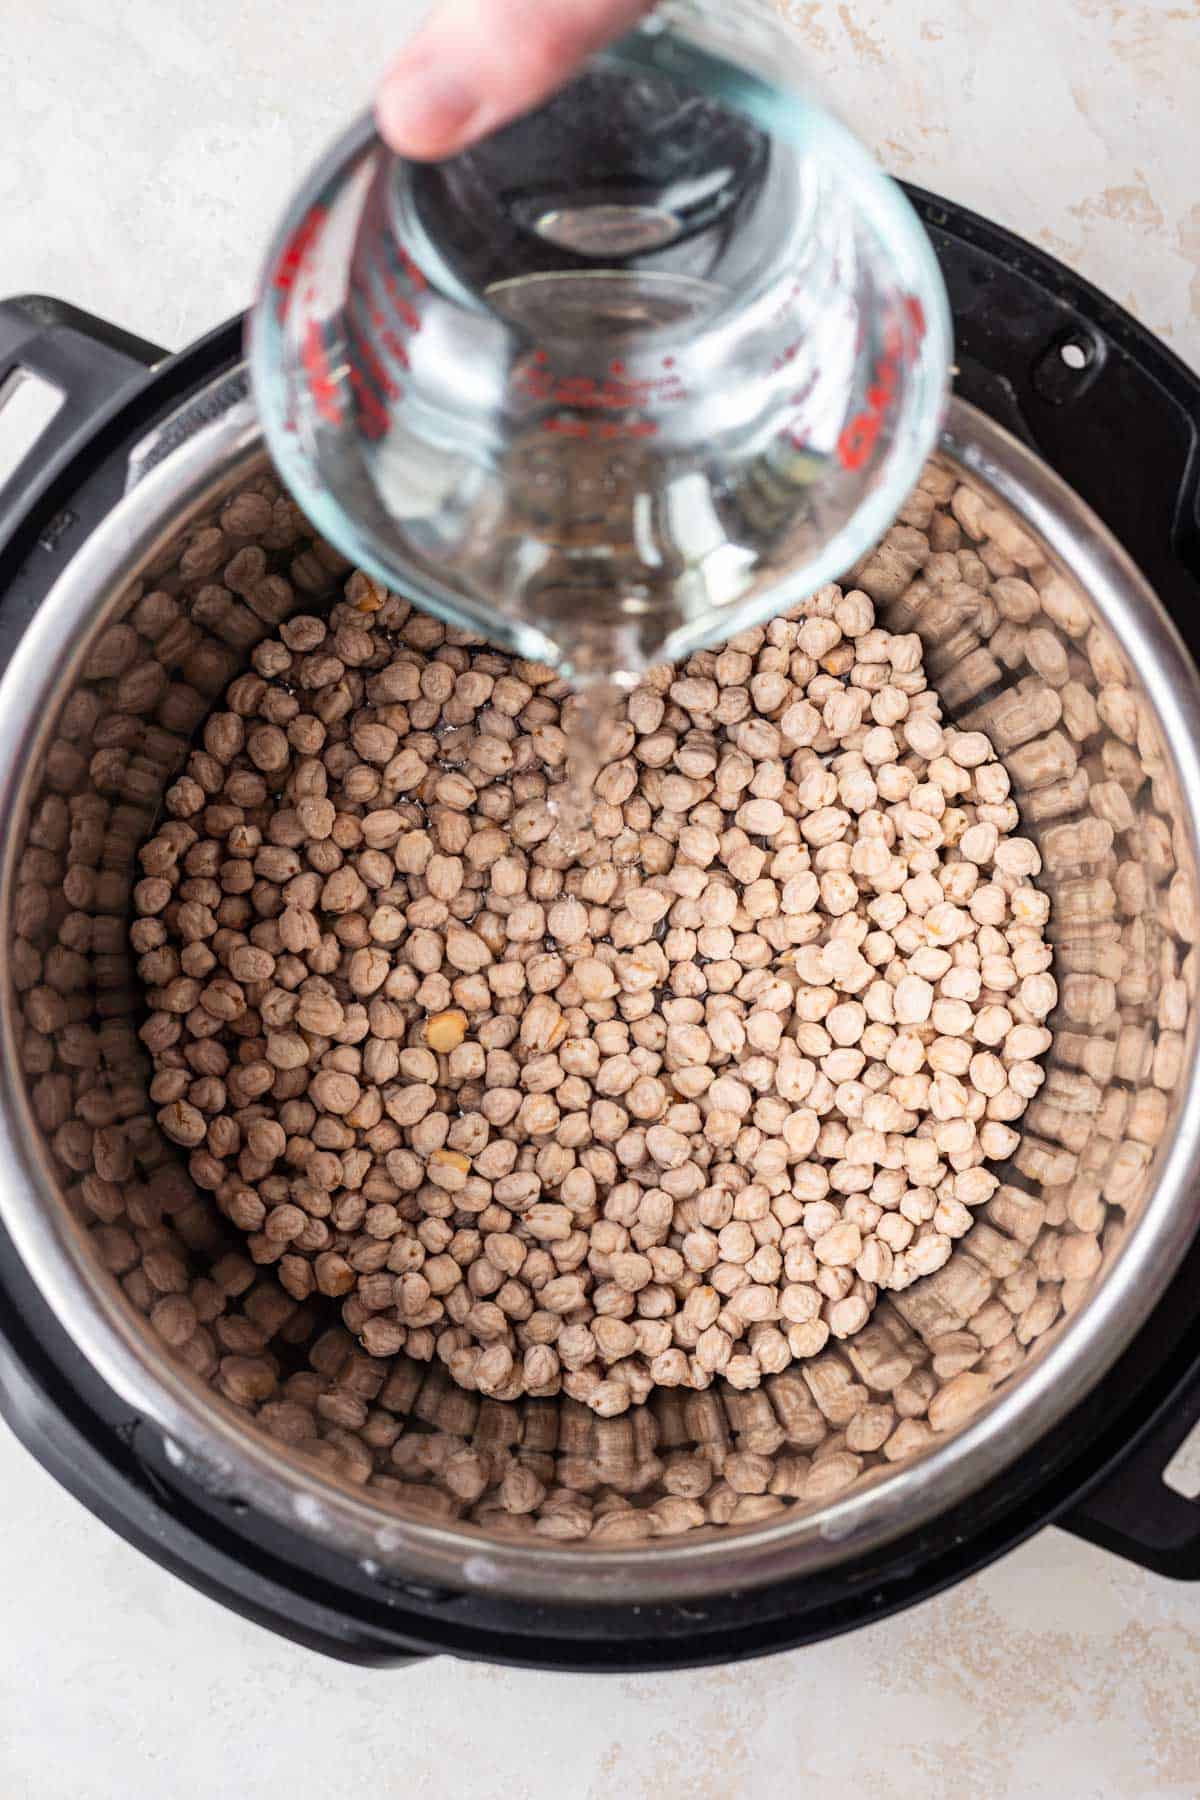 Pouring water over chickpeas in Instant Pot.